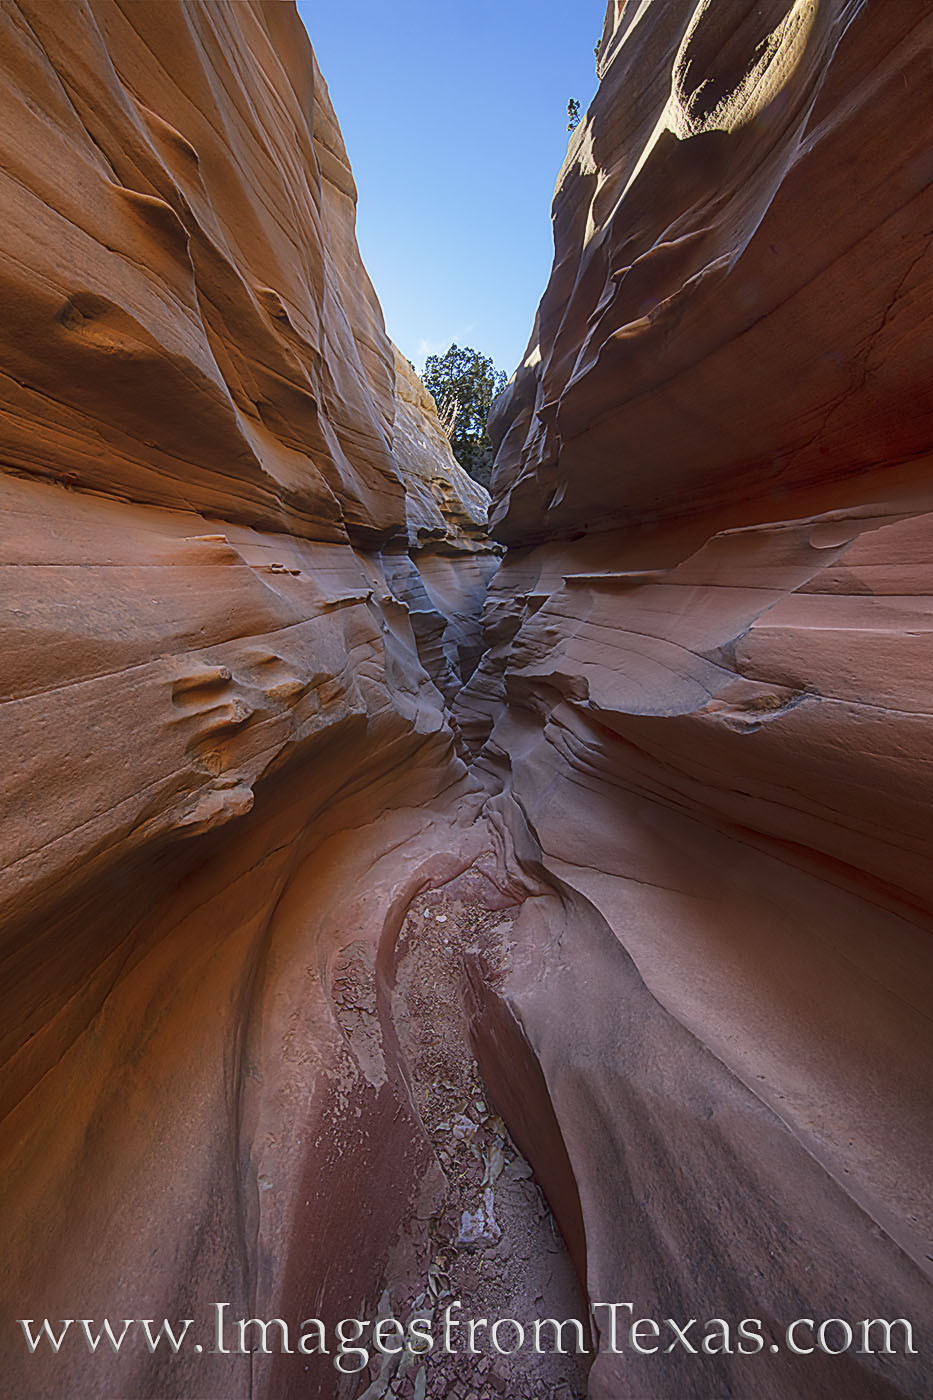 The walls of the Upper Slot Canyon, part of the Central Utah Slot Canyon system in Palo Duro State Park, twist and turn in the...